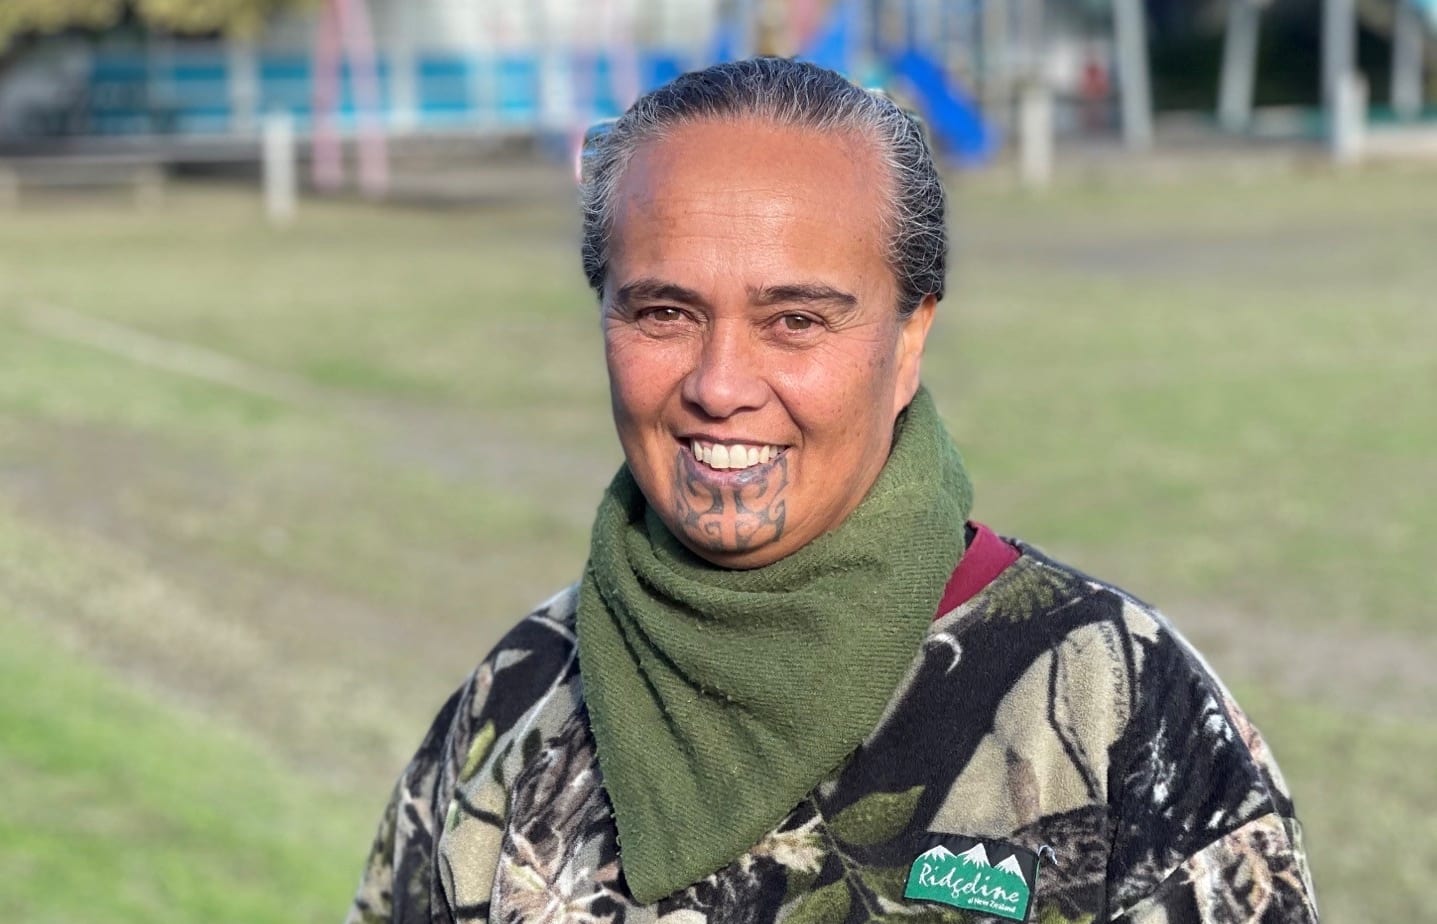 Hatea-a-Rangi School principal Karla Kohatu says the school’s hopes and dreams were washed out into the ocean.